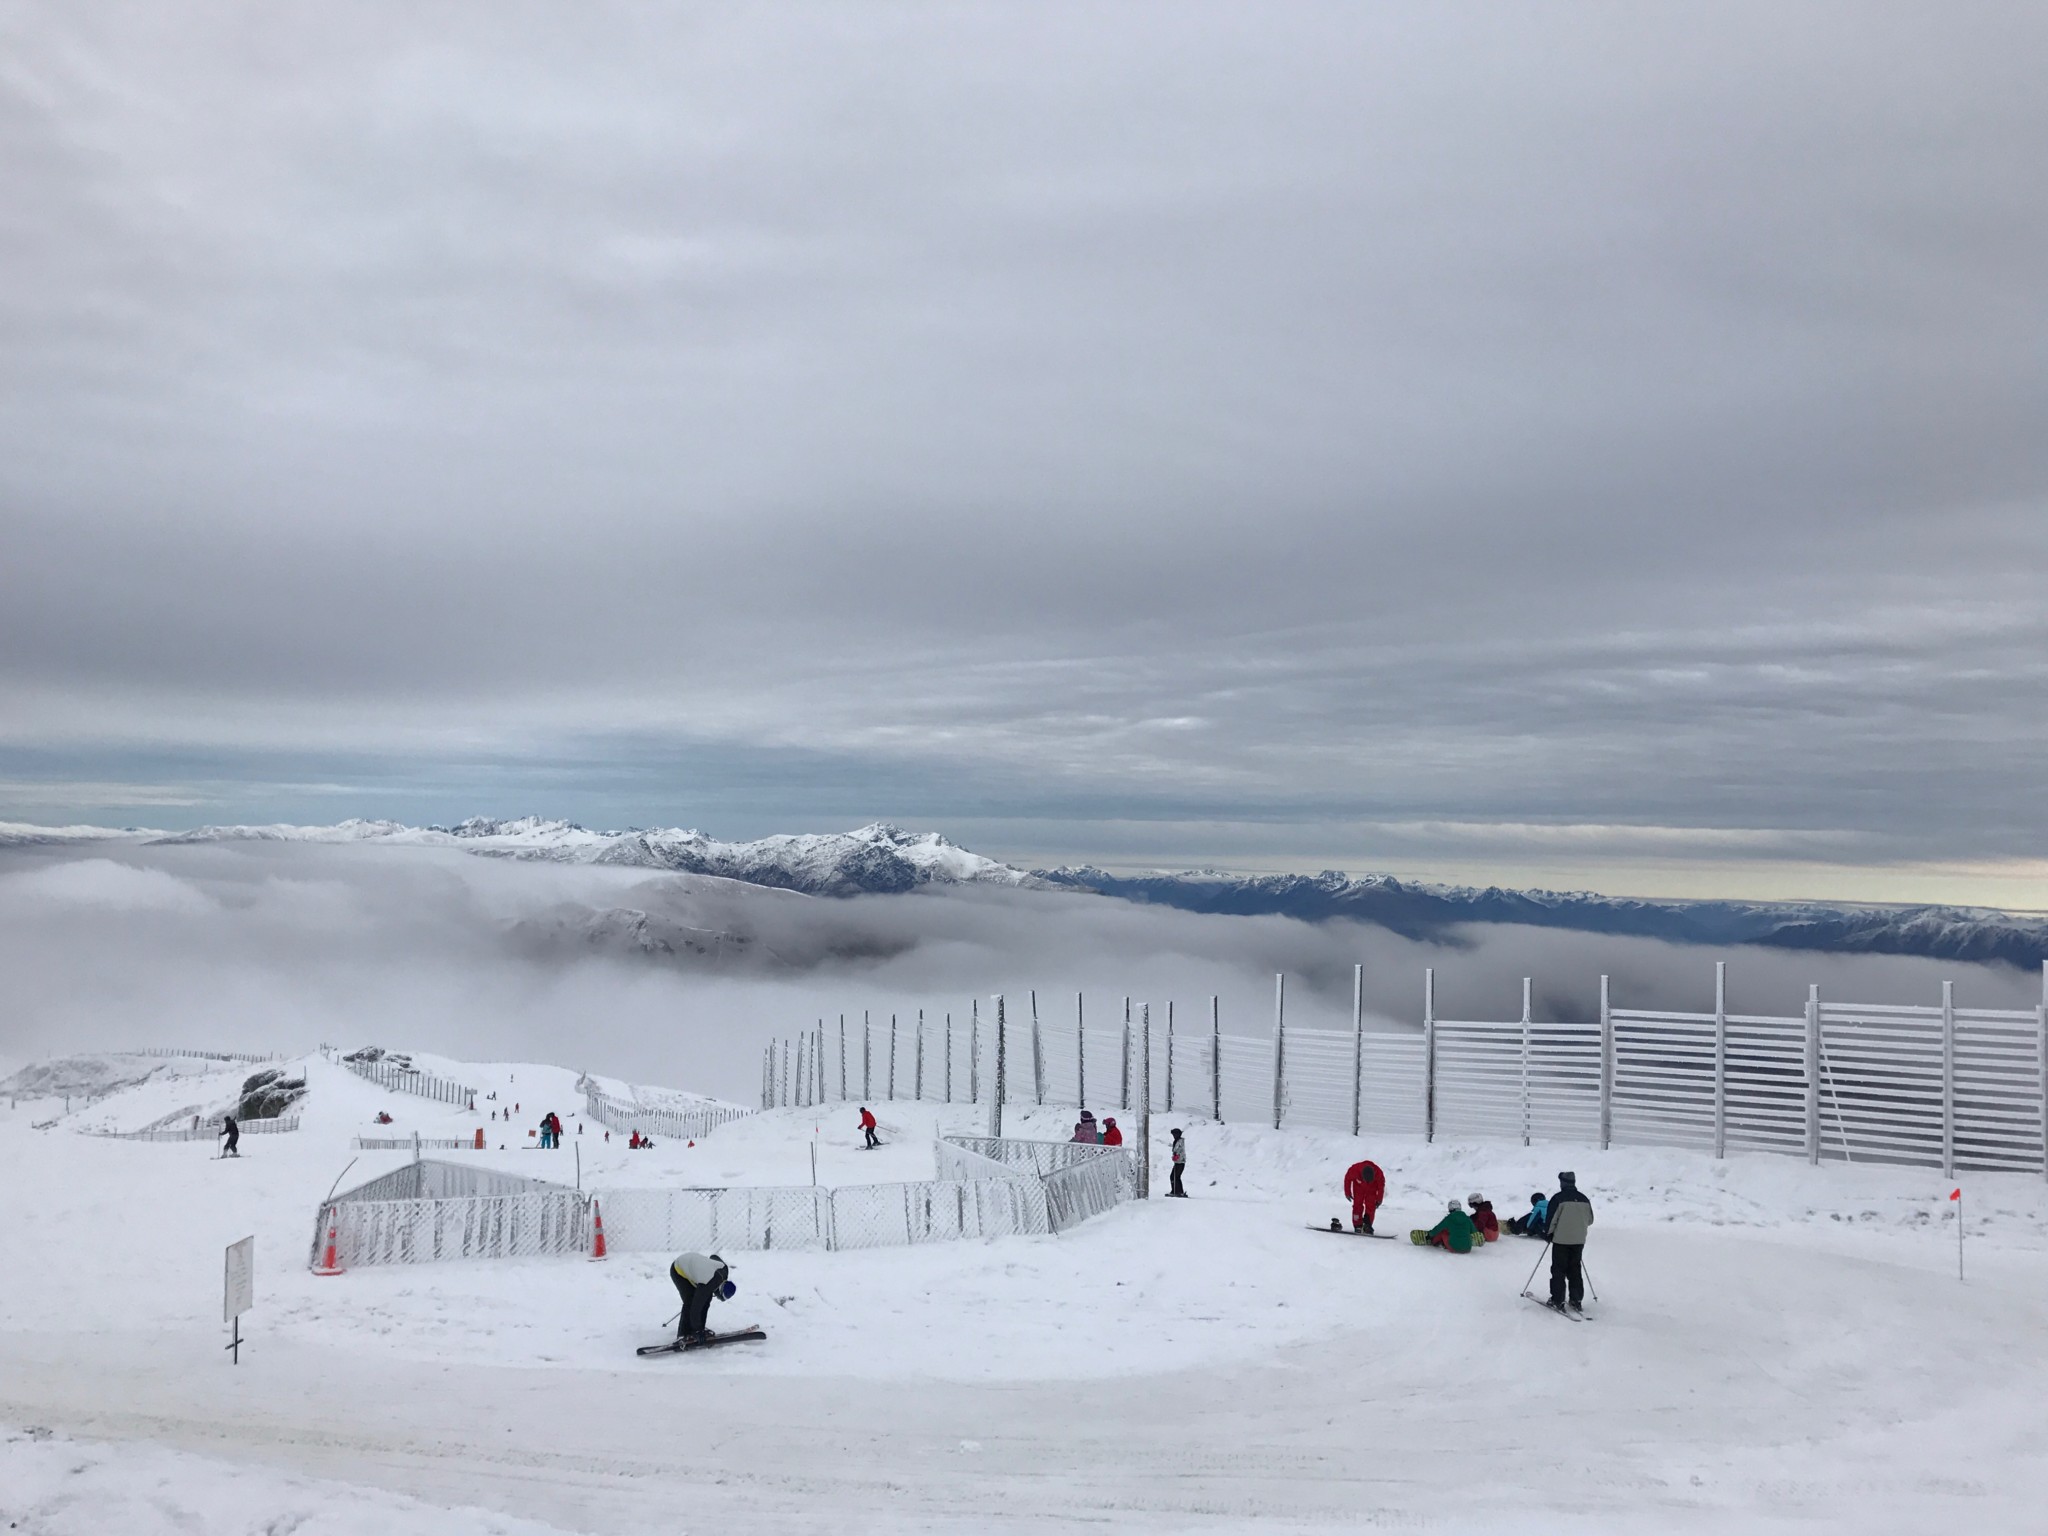 Perfect setting for a day of skiing at Cardrona